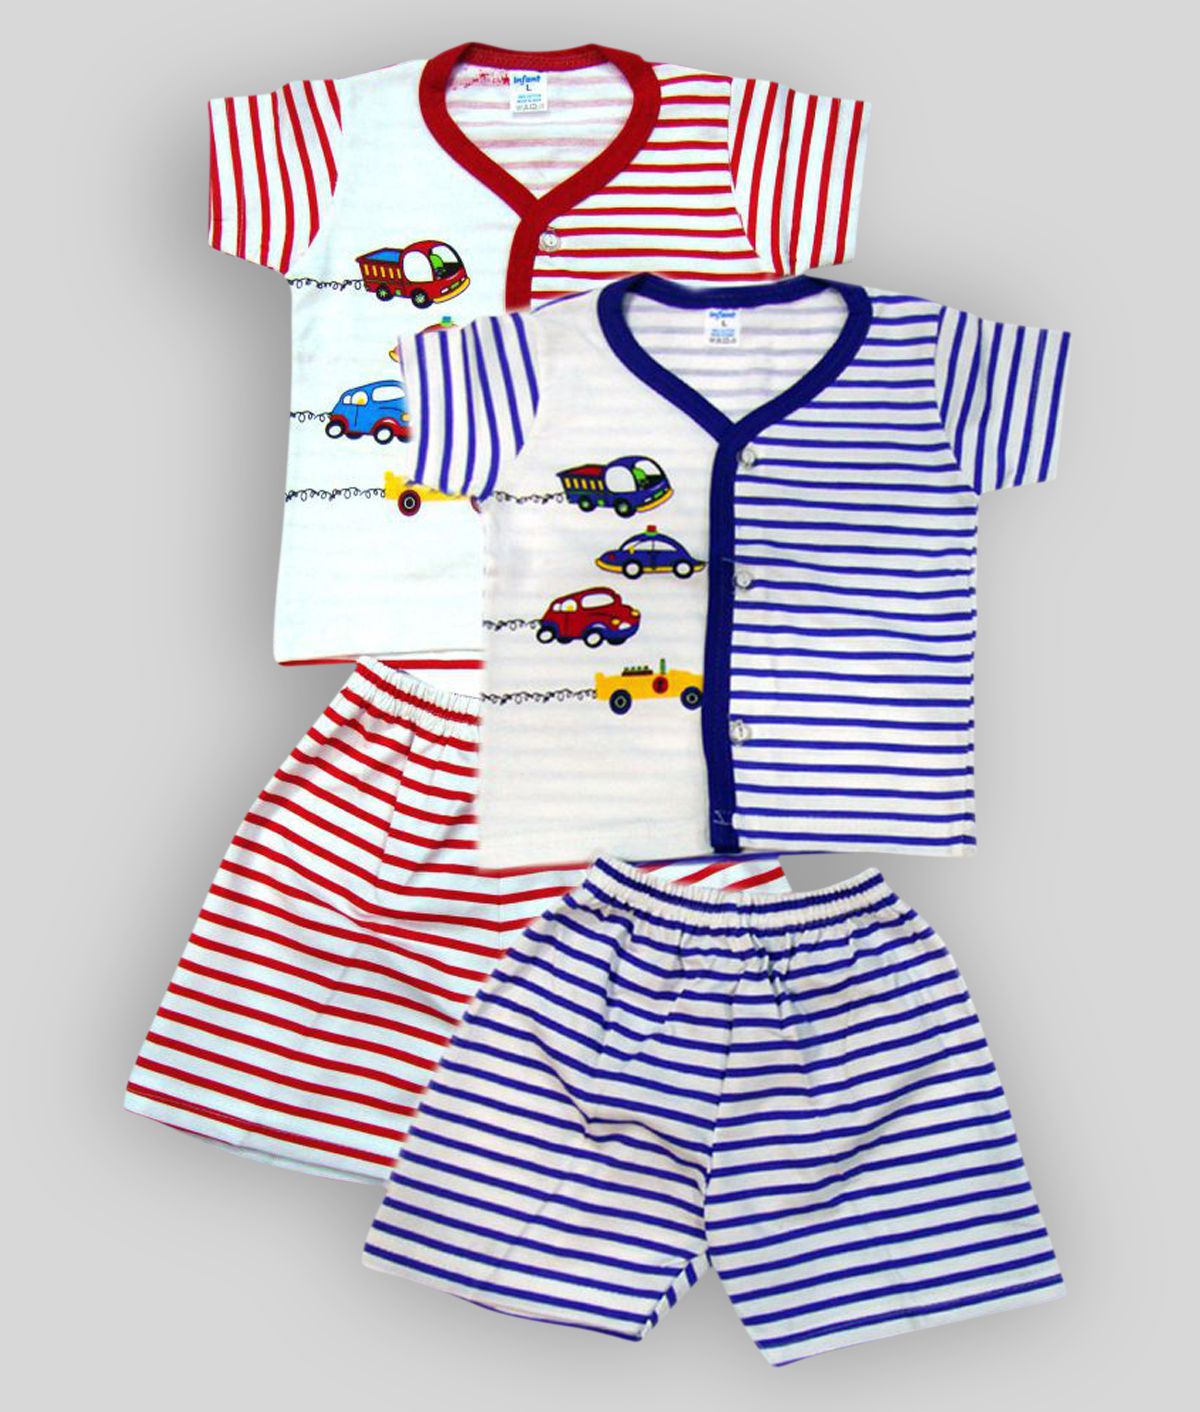     			INFANT - Multicolor Cotton Top & Shorts For Baby Boy ( Pack of 2 )